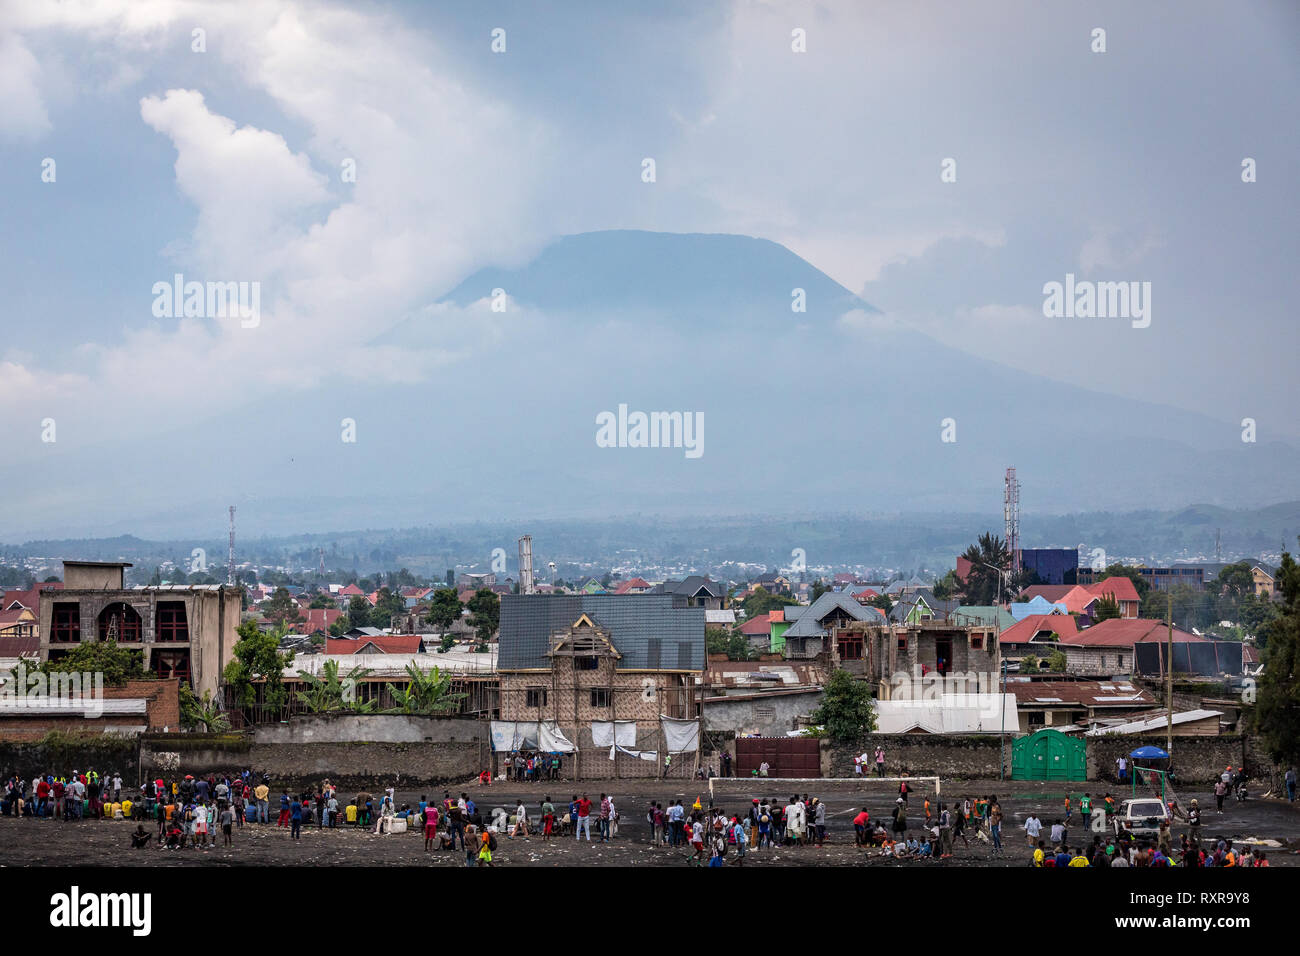 The city of Goma, Democratic Republic of Congo, with Nyiragongo volcano in the distance Stock Photo